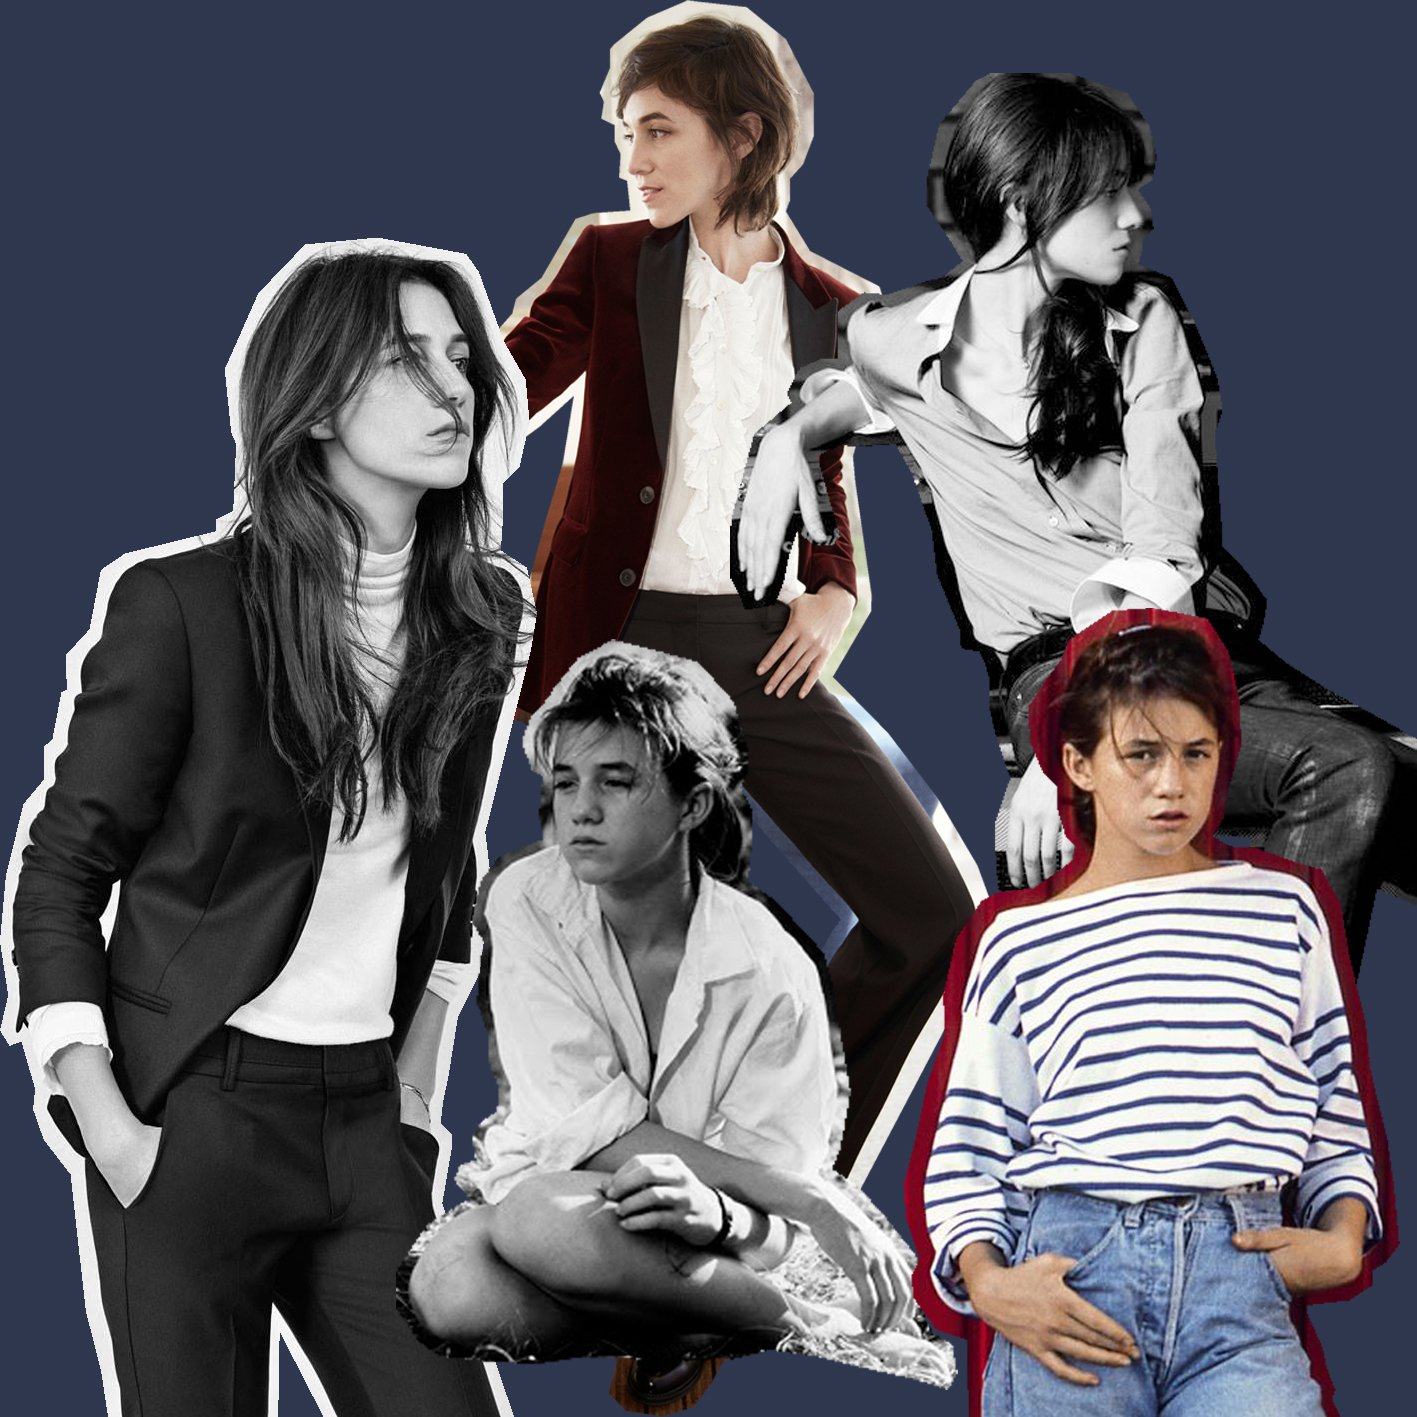 Charlotte Gainsbourg, Style deciphering